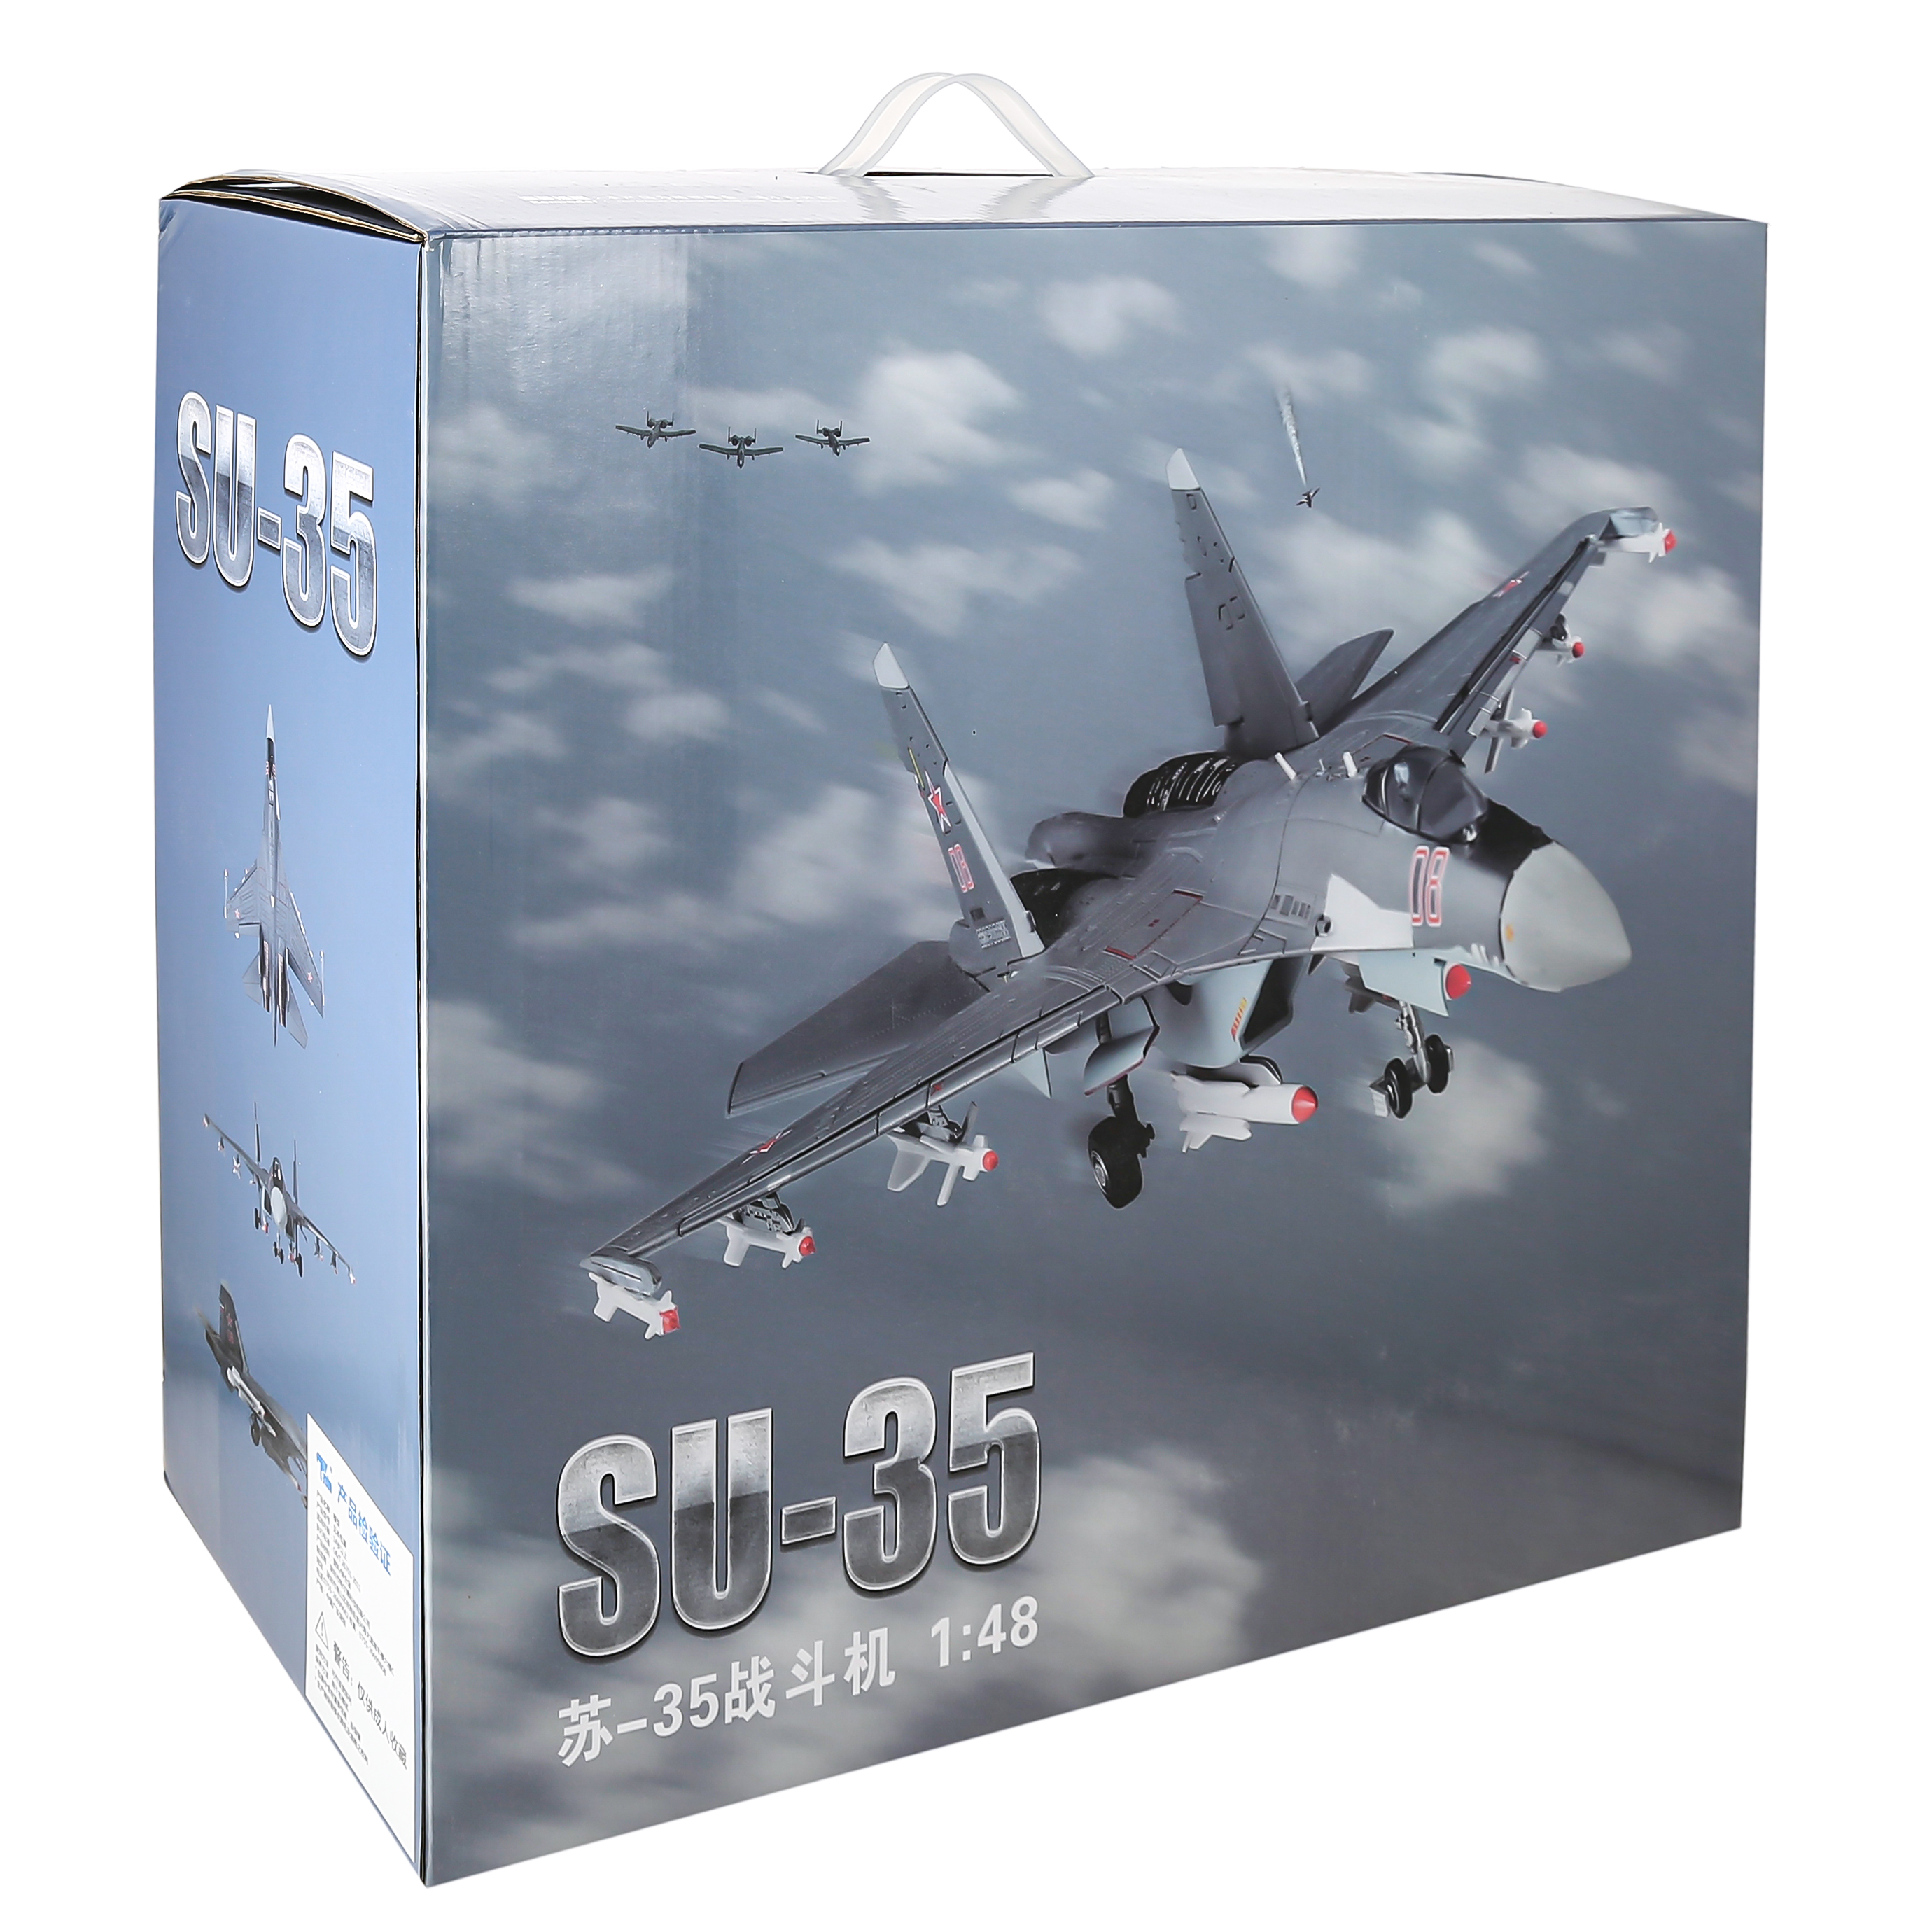       -35 ,  1:48.  47 . Large metal model of a Russian Su-35 fighter airplane, scale 1:48. Length 47 cm. # 10 hobbyplus.ru